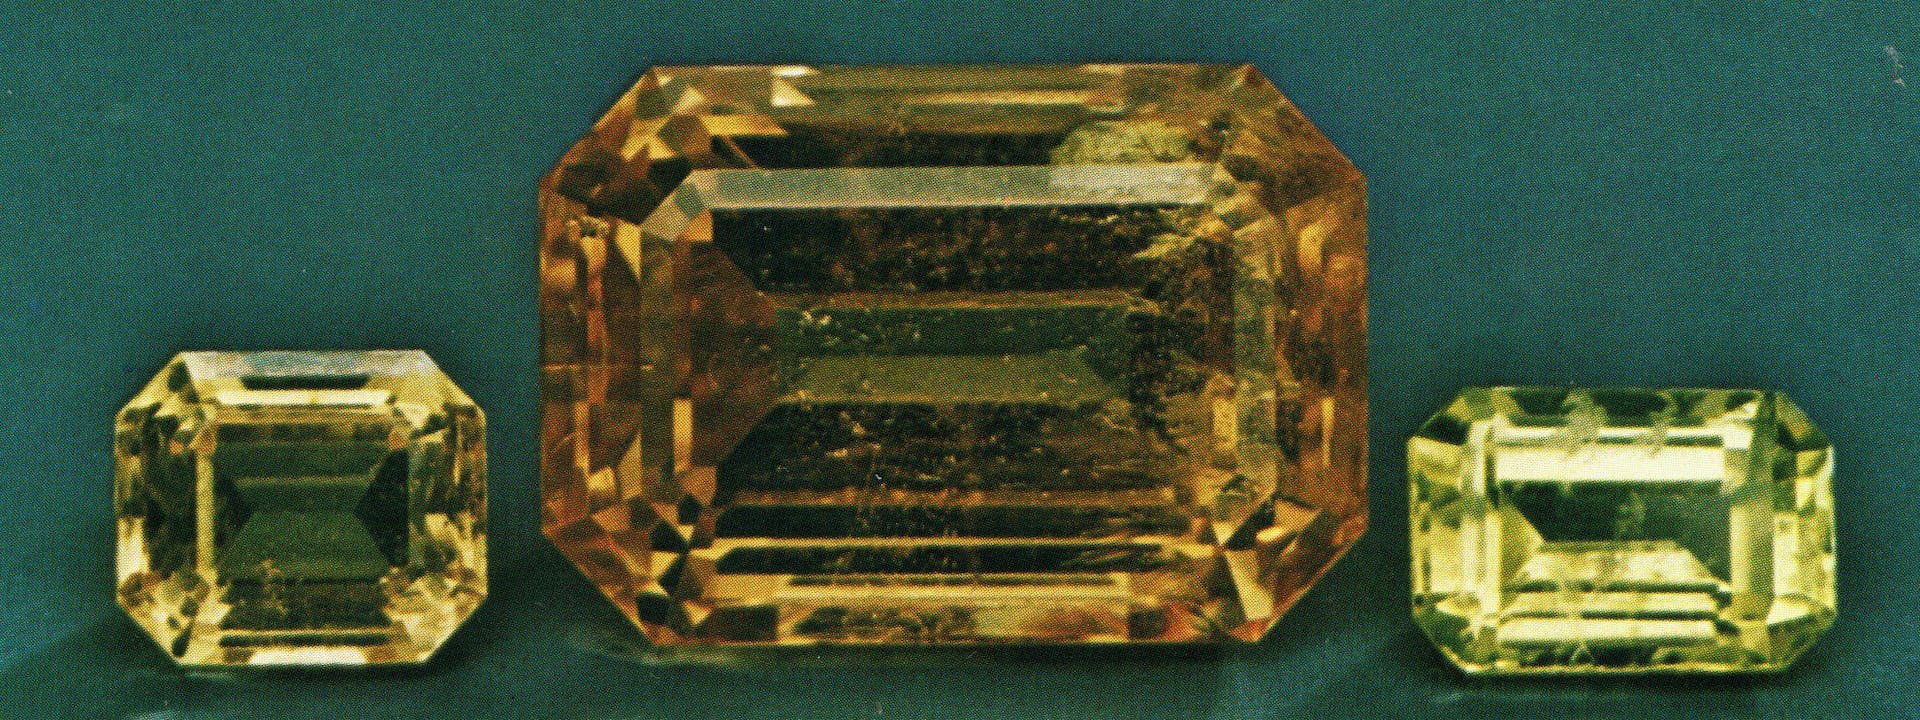 Faceted willemites - New Jersey